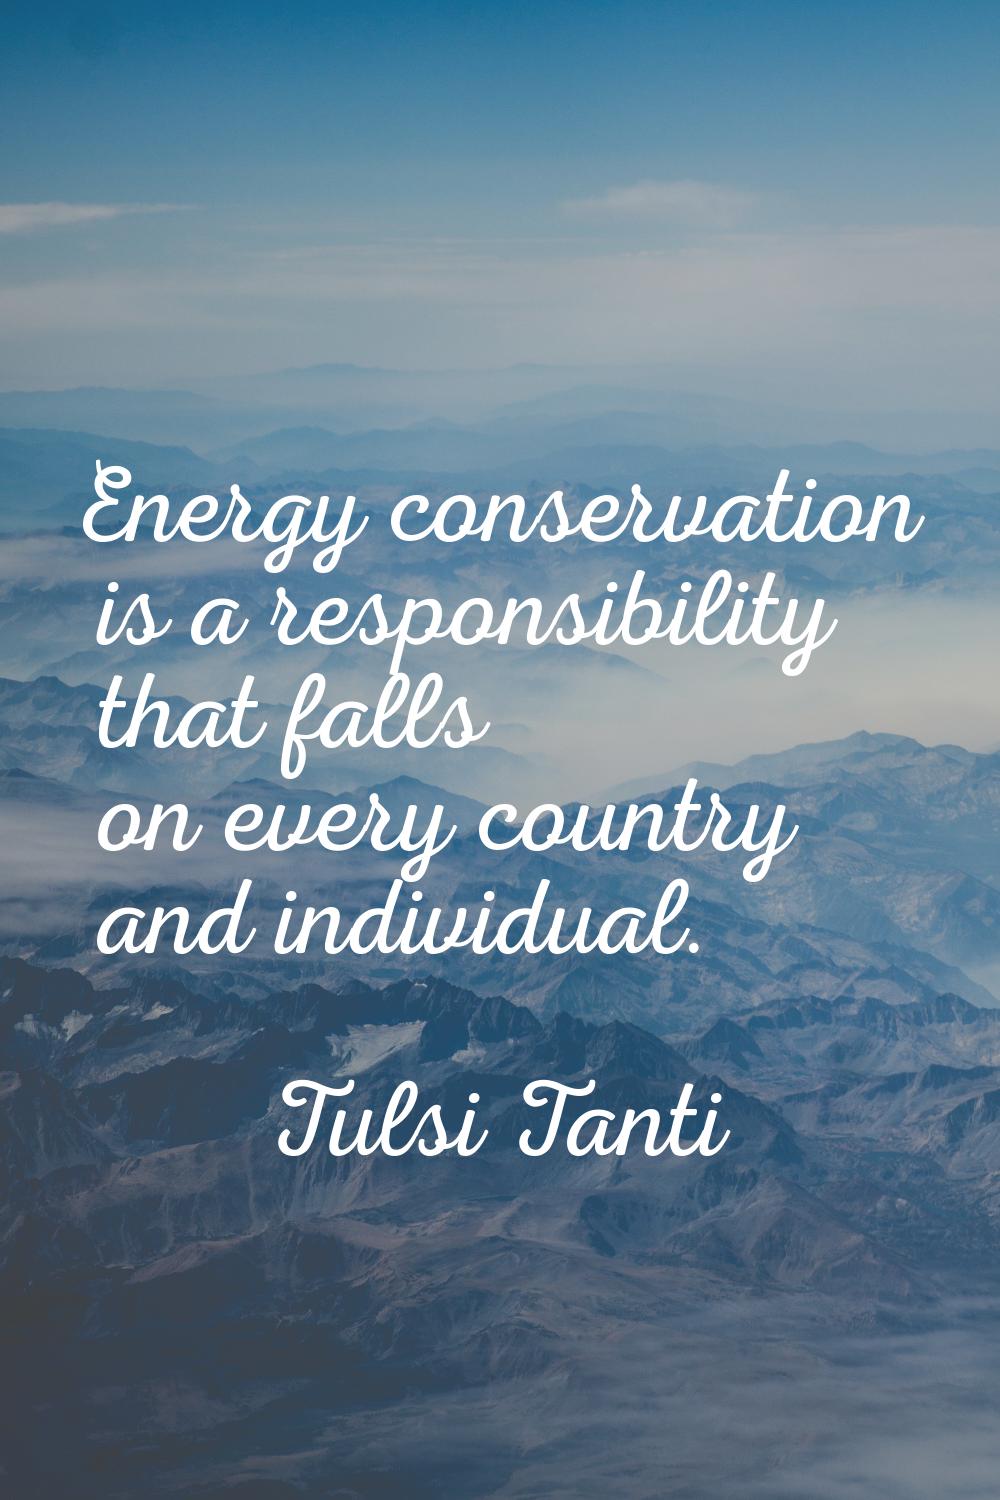 Energy conservation is a responsibility that falls on every country and individual.